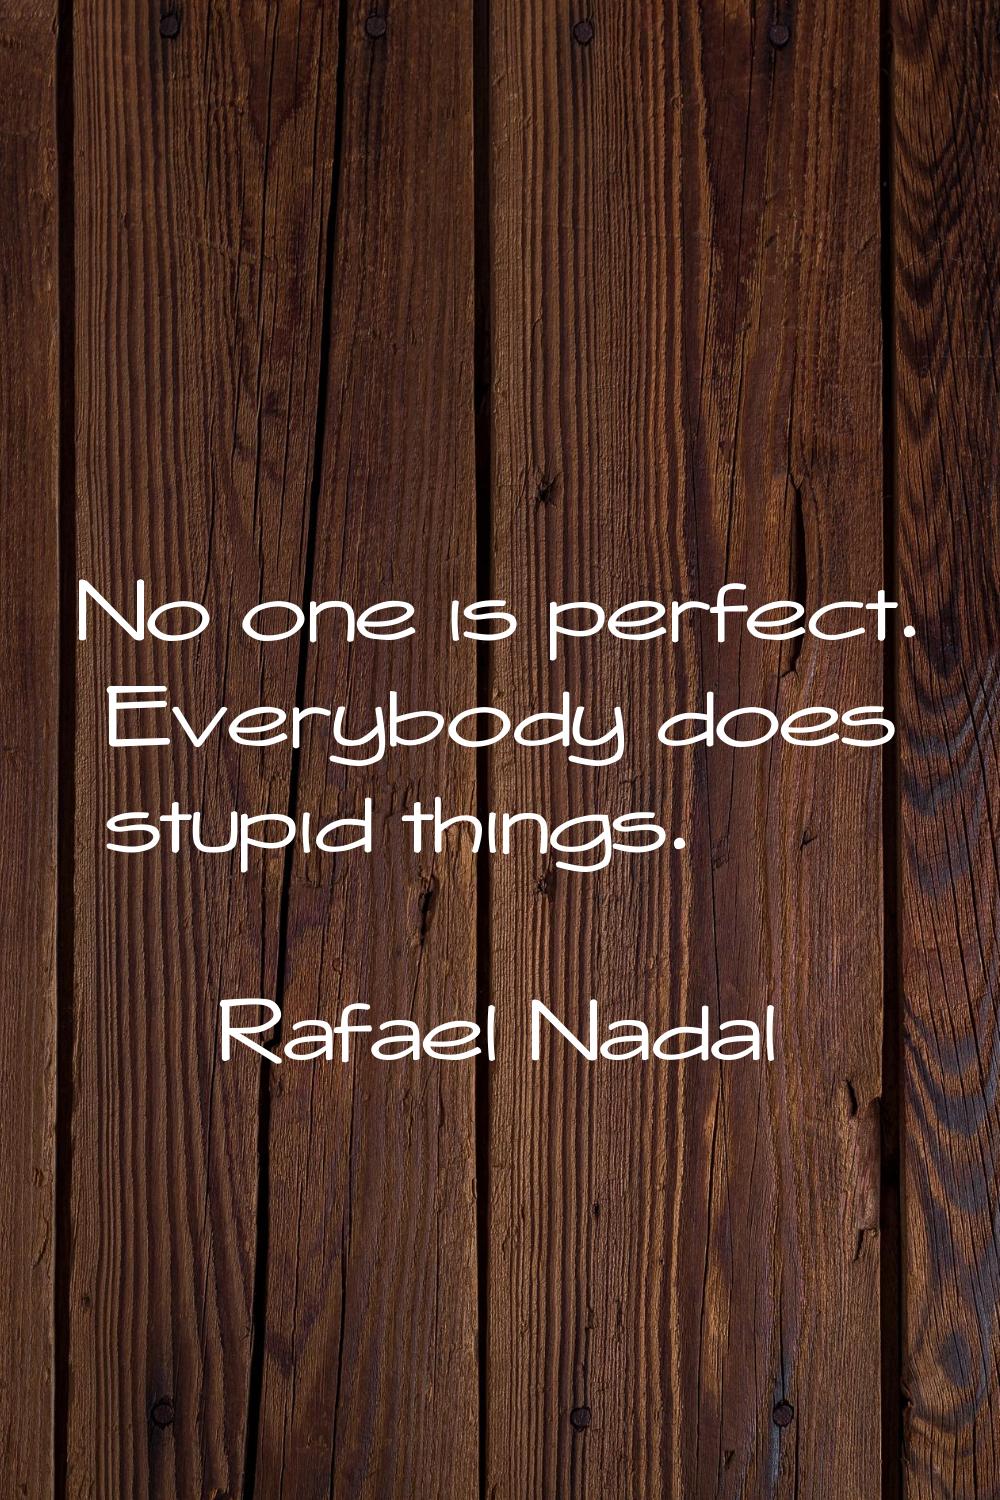 No one is perfect. Everybody does stupid things.